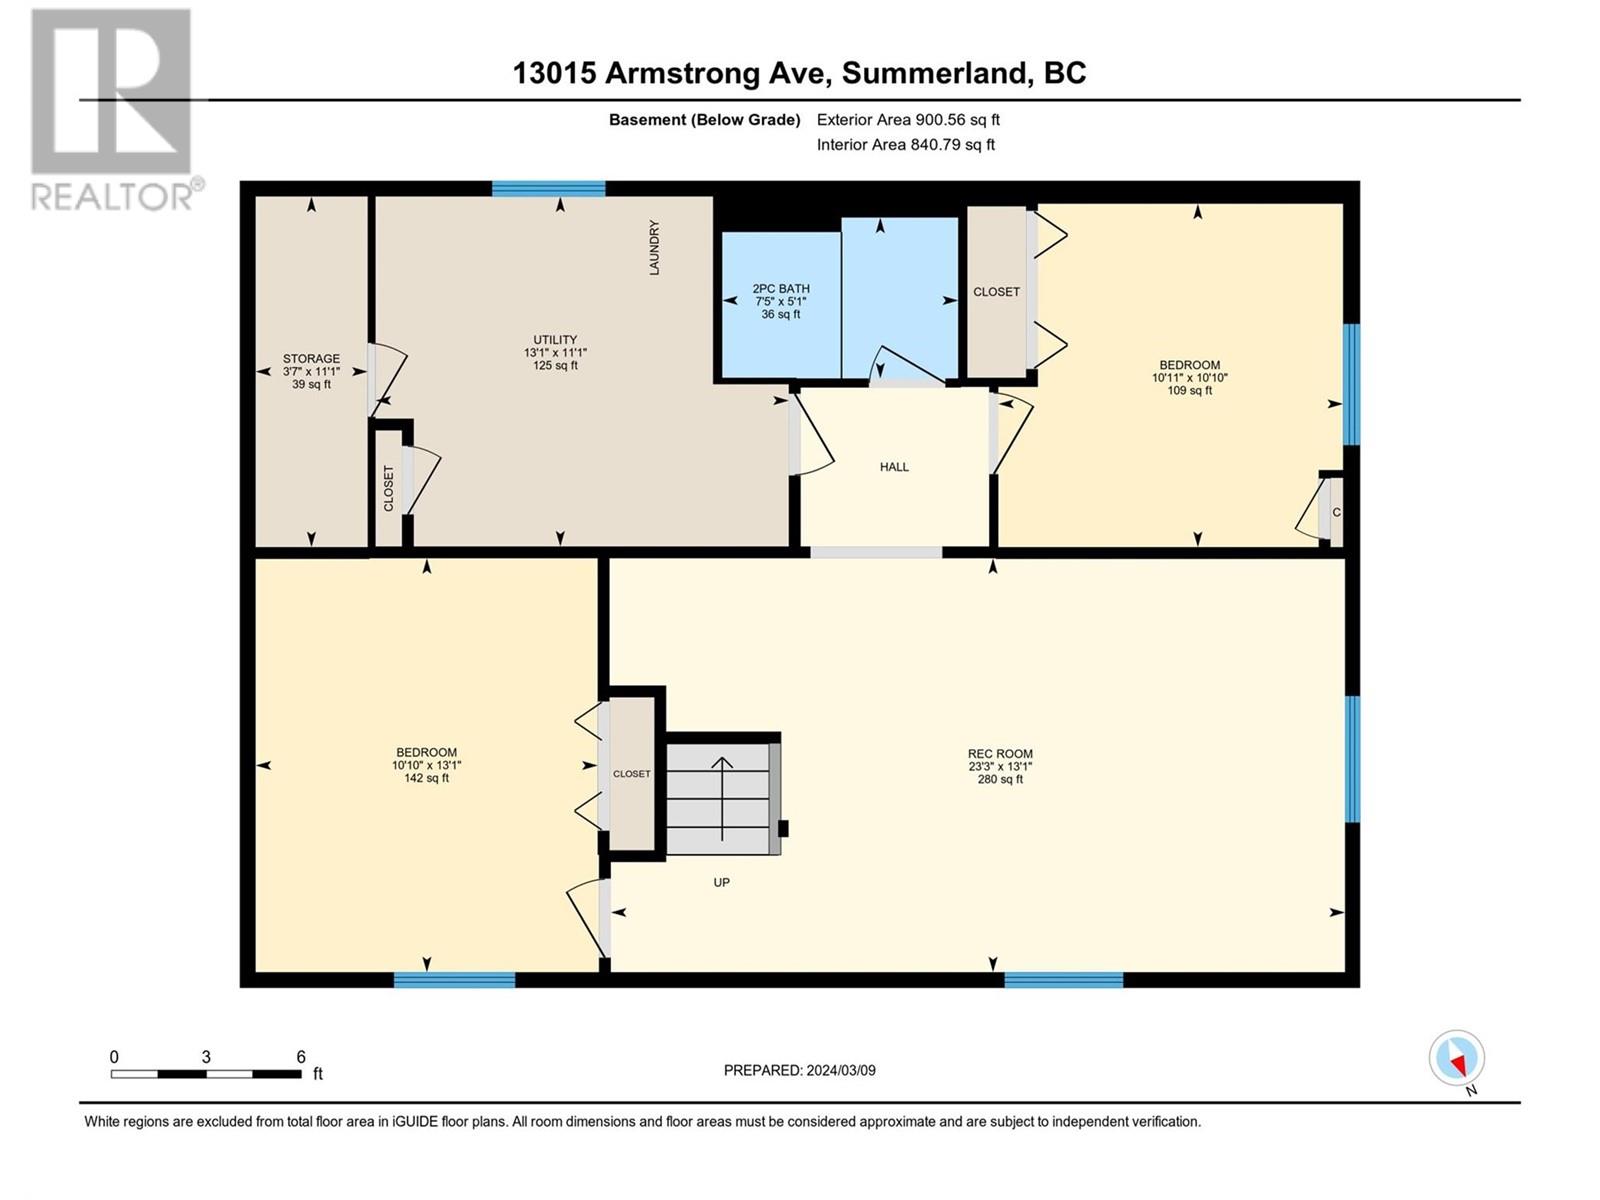 13015 Armstrong Avenue Summerland